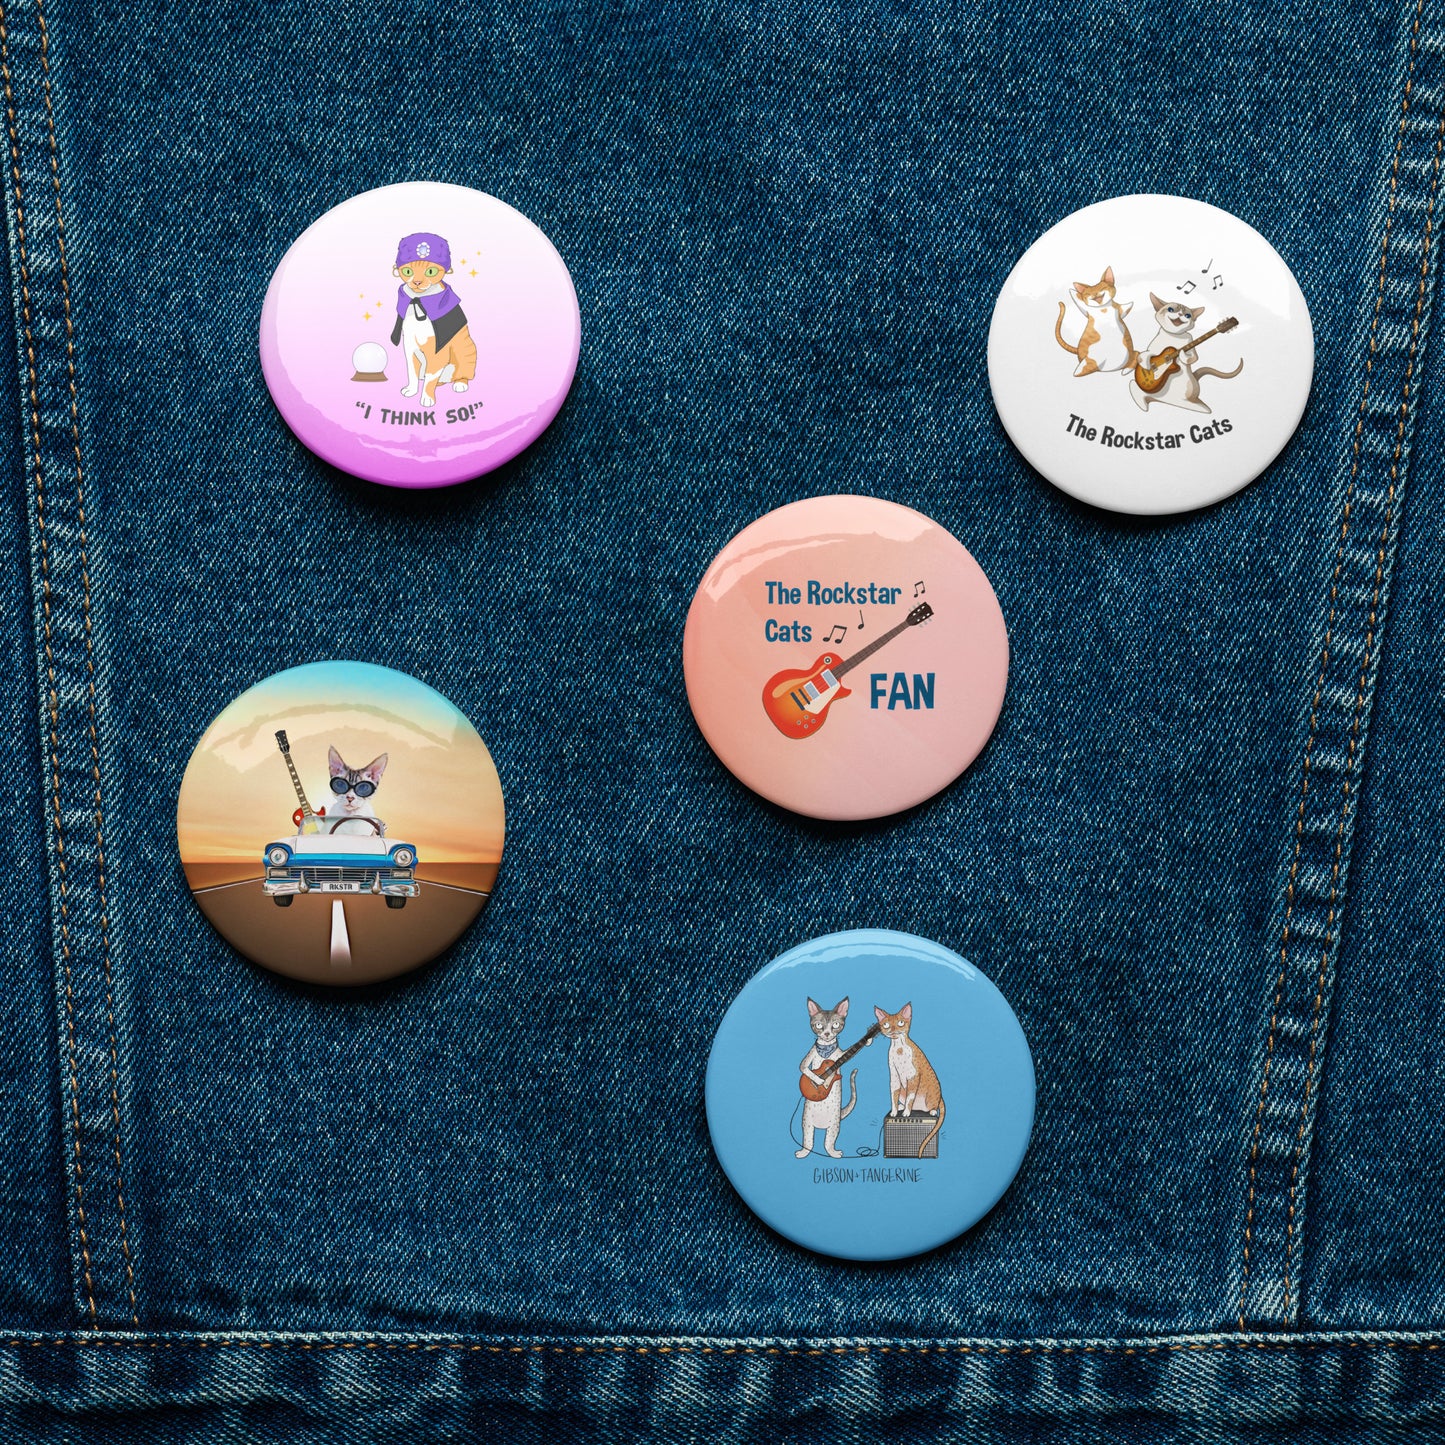 Set of pin buttons featuring The Rockstar Cat